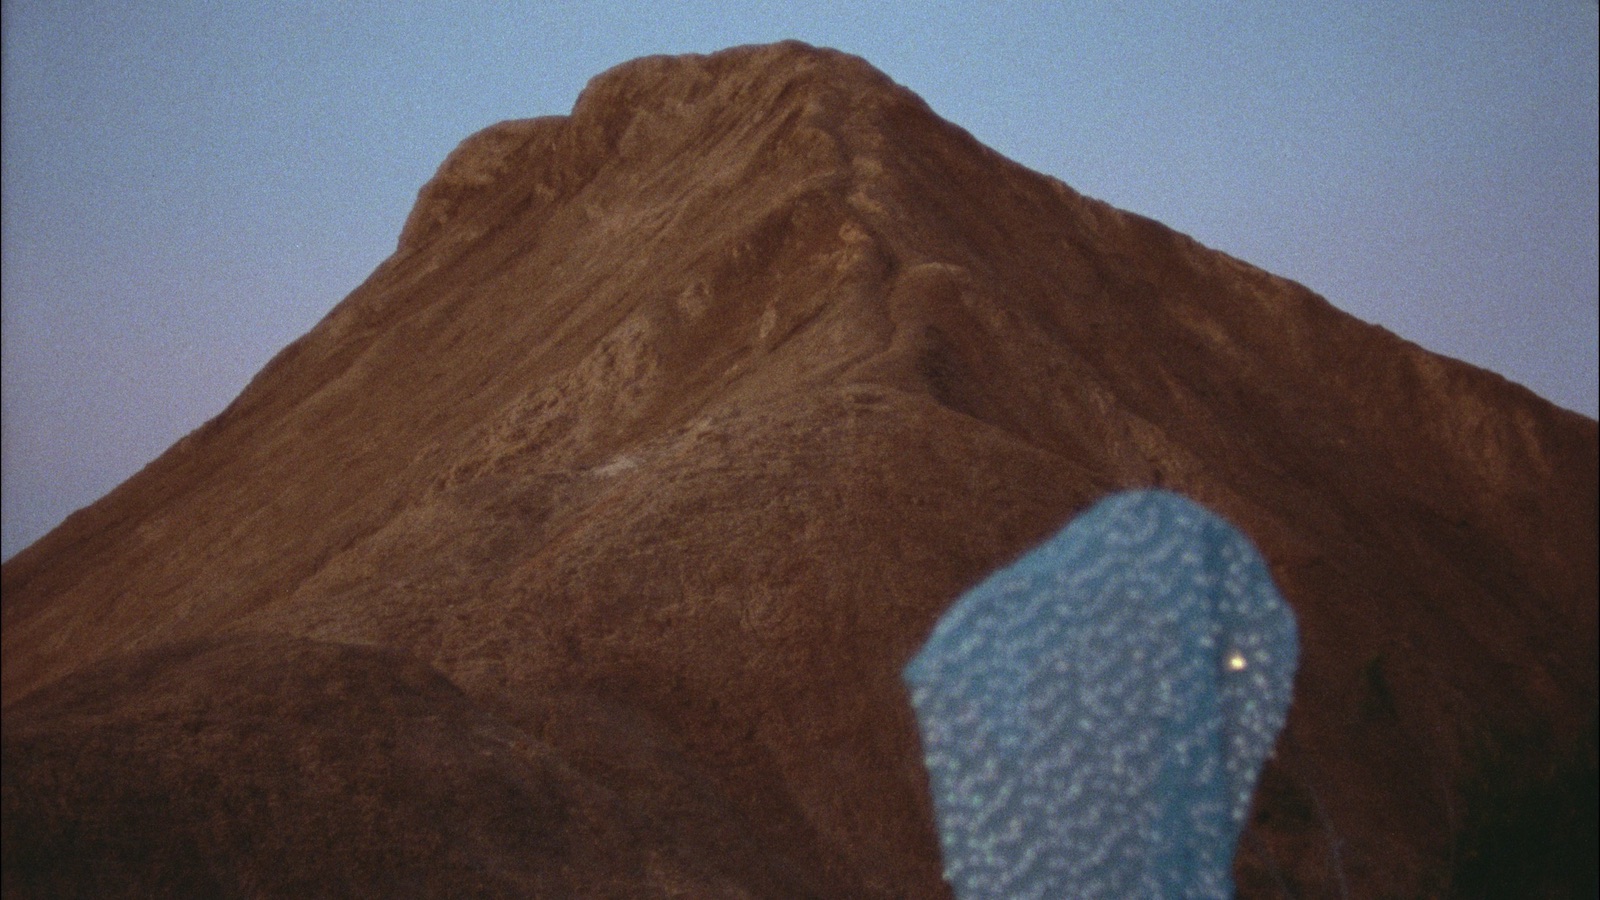 a mountain wth a blue shawled figure in the foreground